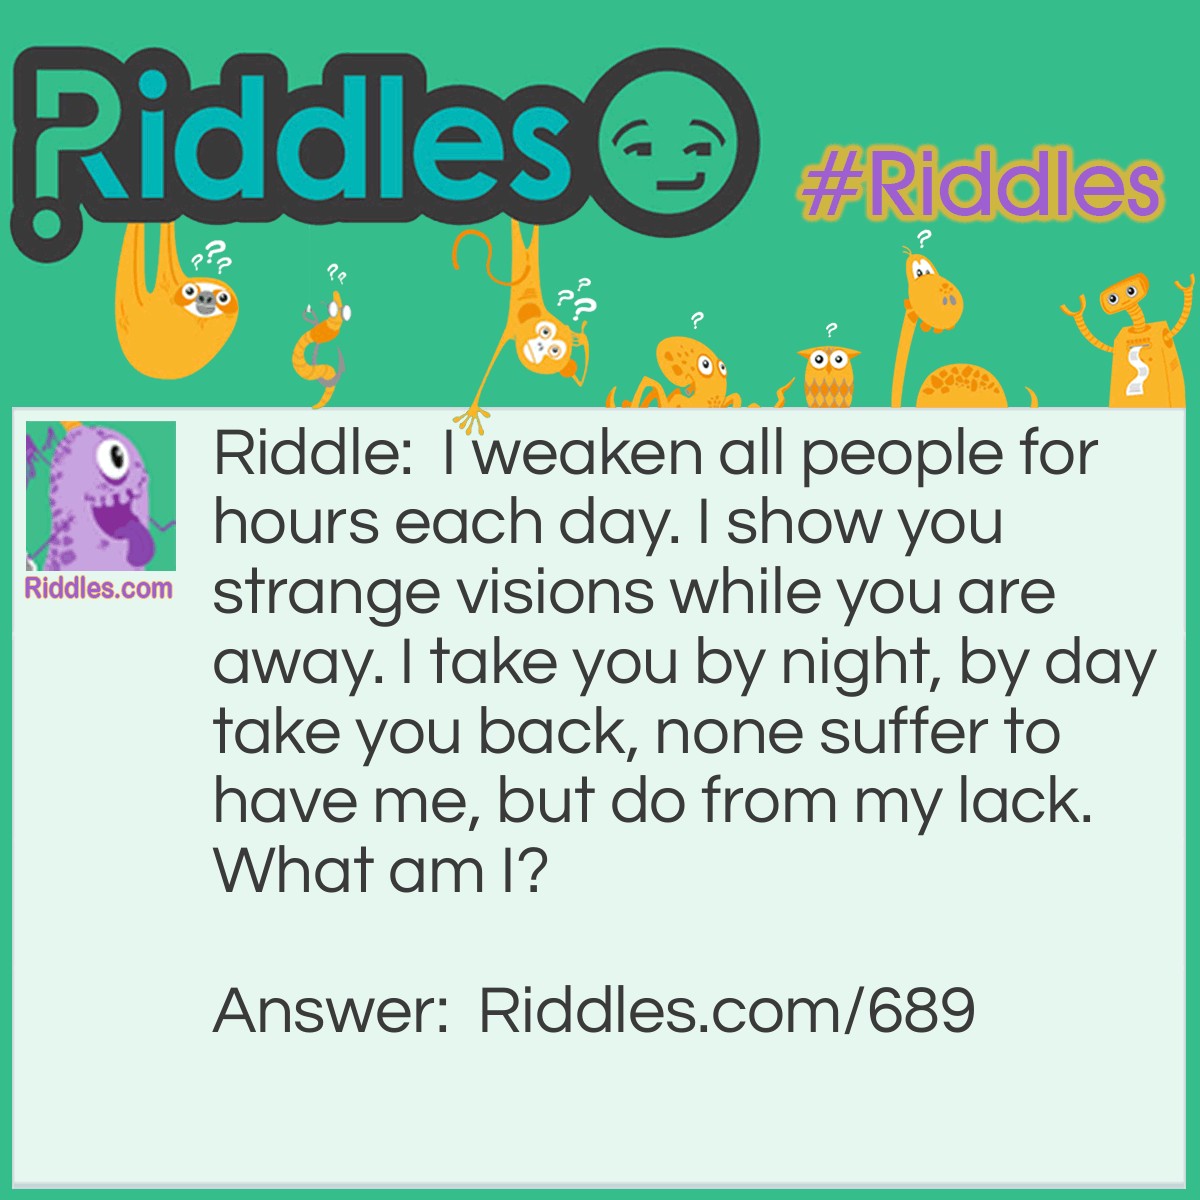 Riddle: I weaken all people for hours each day. I show you strange visions while you are away. I take you by night, by day take you back, none suffer to have me, but do from my lack.
What am I? Answer: I am sleep.